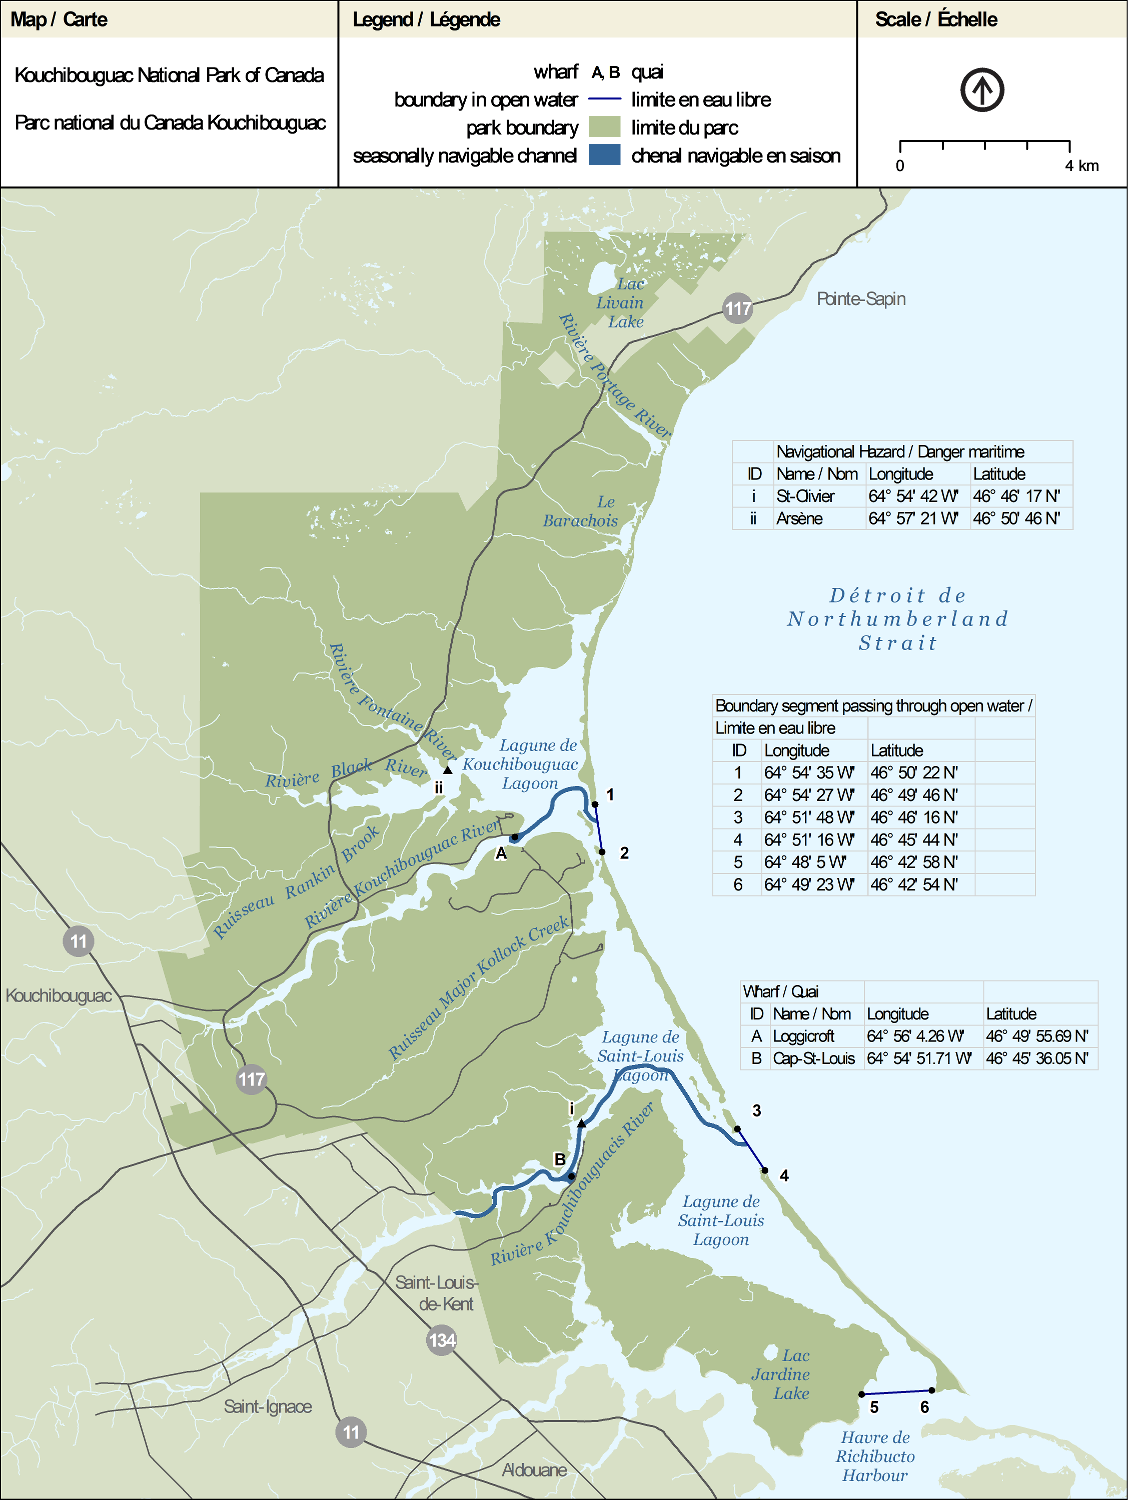 Map of Kouchibouguac National Park indicating wharfs, navigational hazards, navigable channels, and open water boundaries.